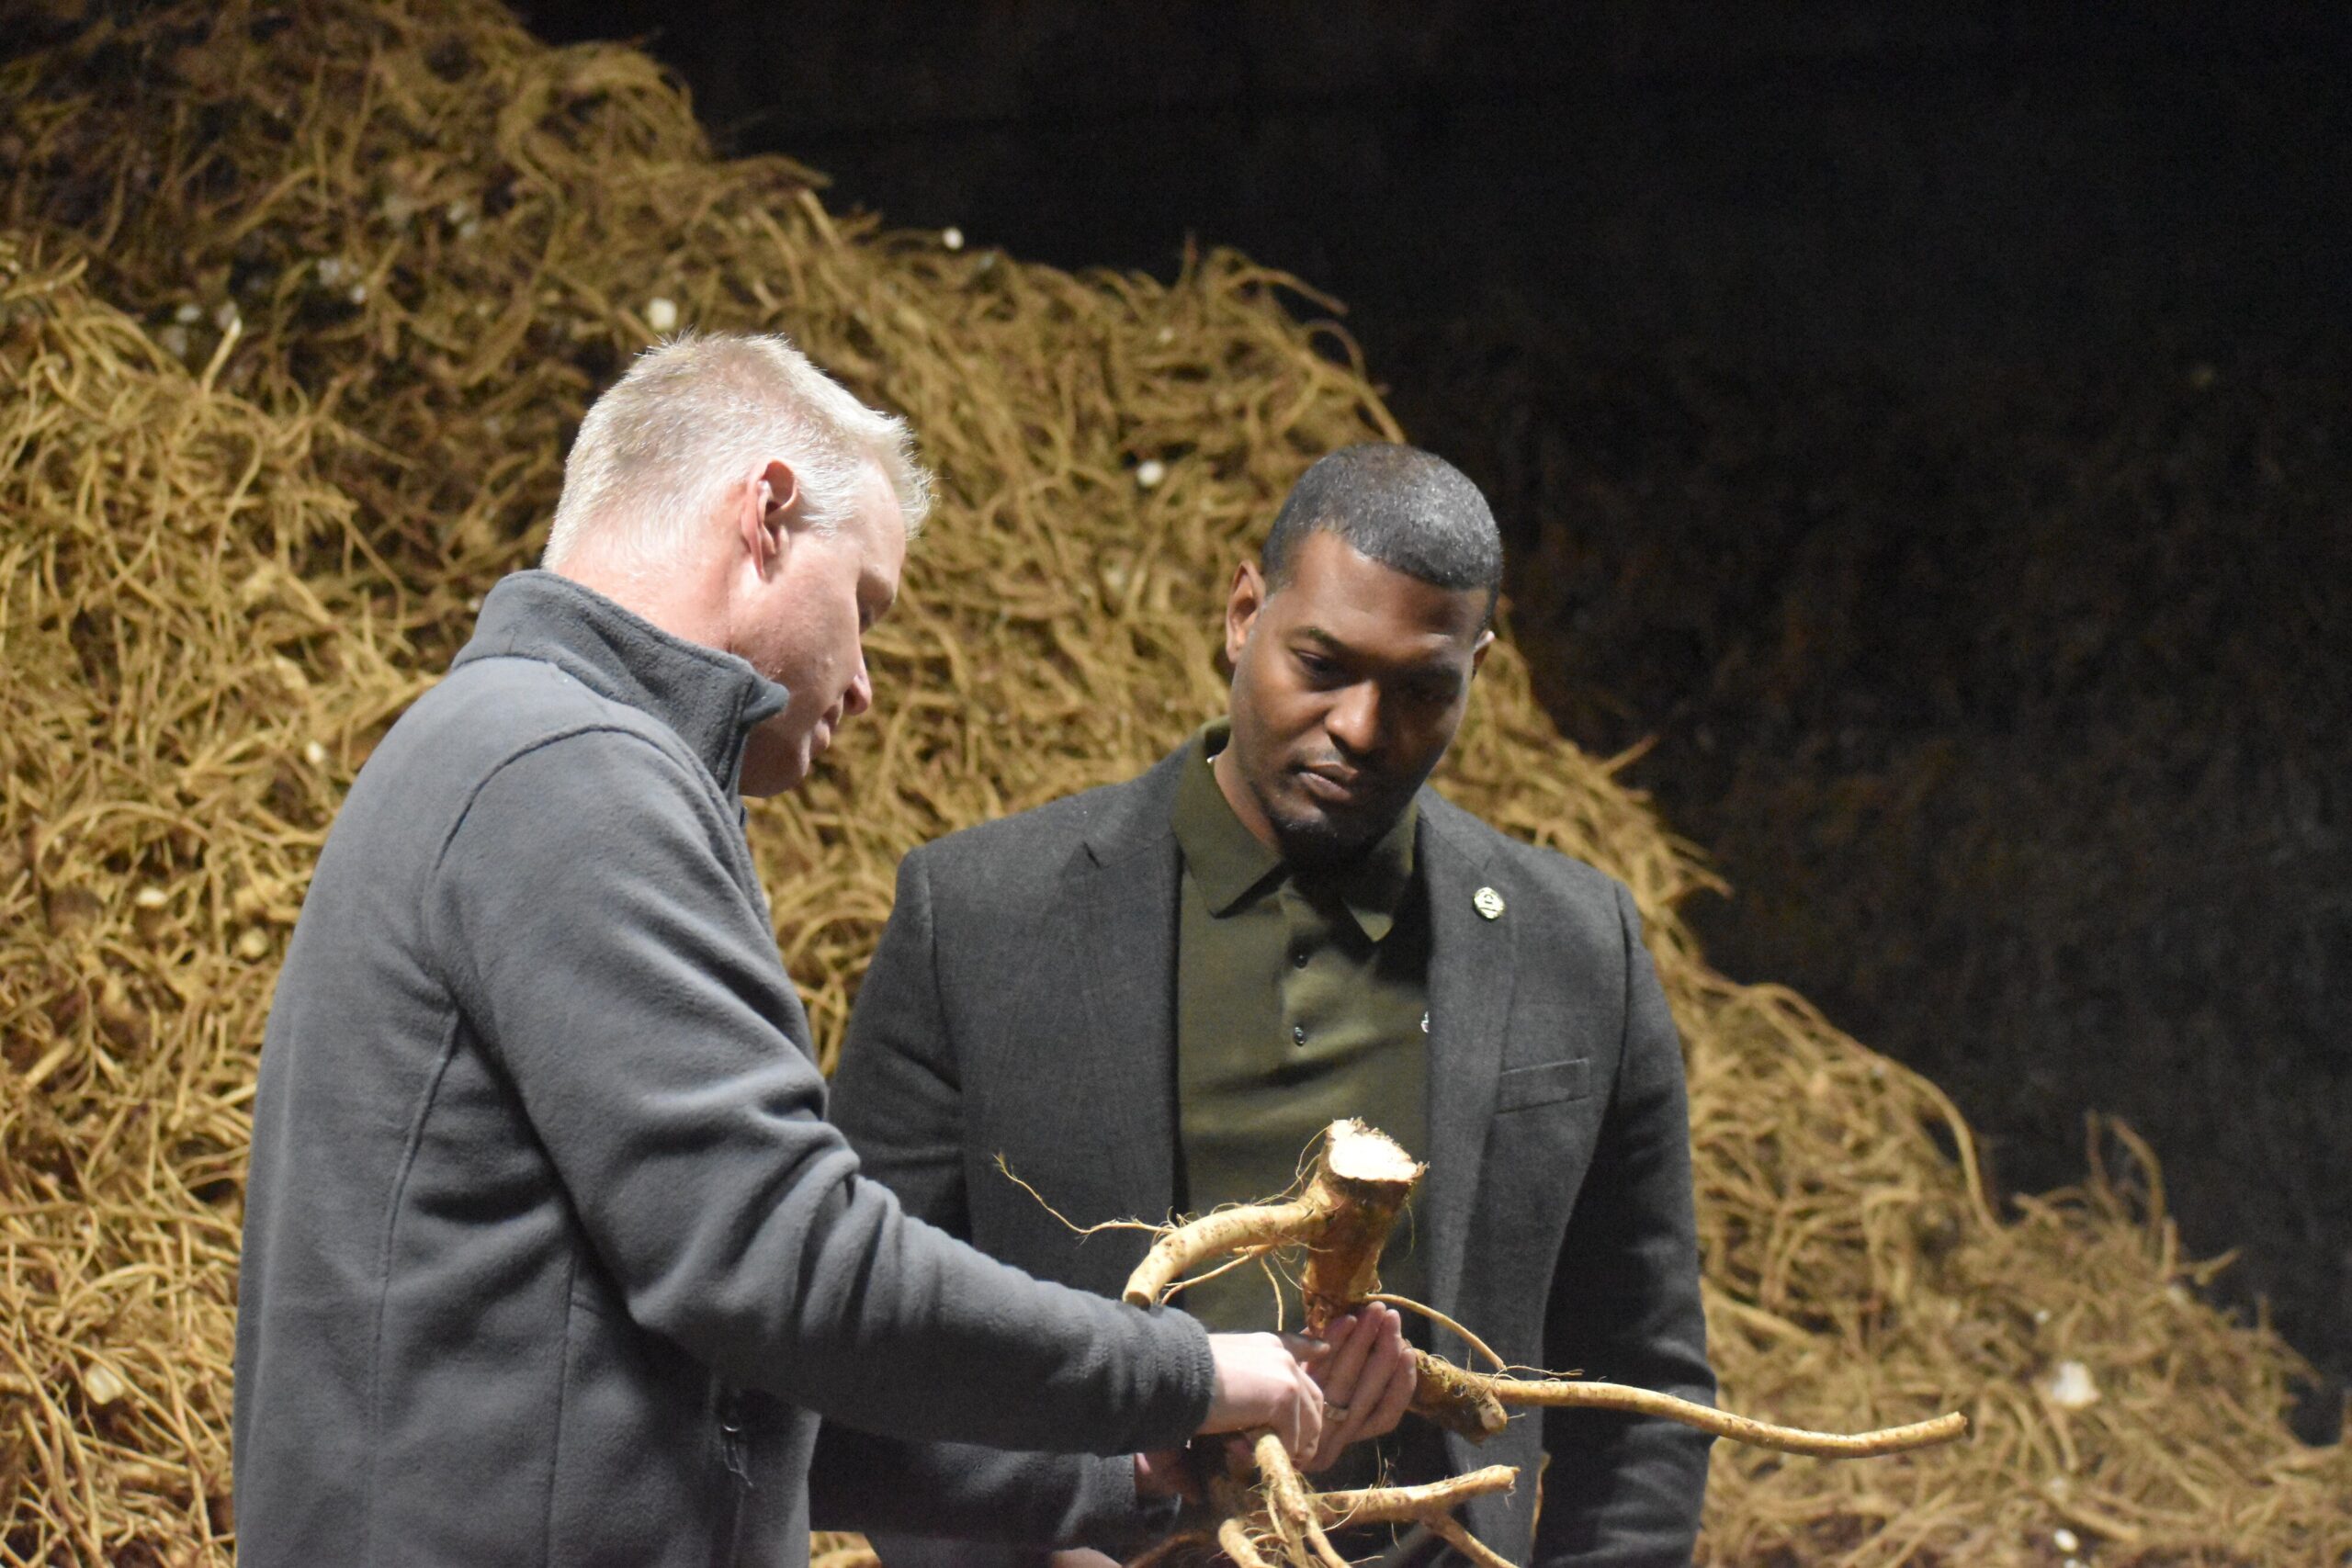 Head of the EPA tours horseradish farm to tout investments in climate-smart practices